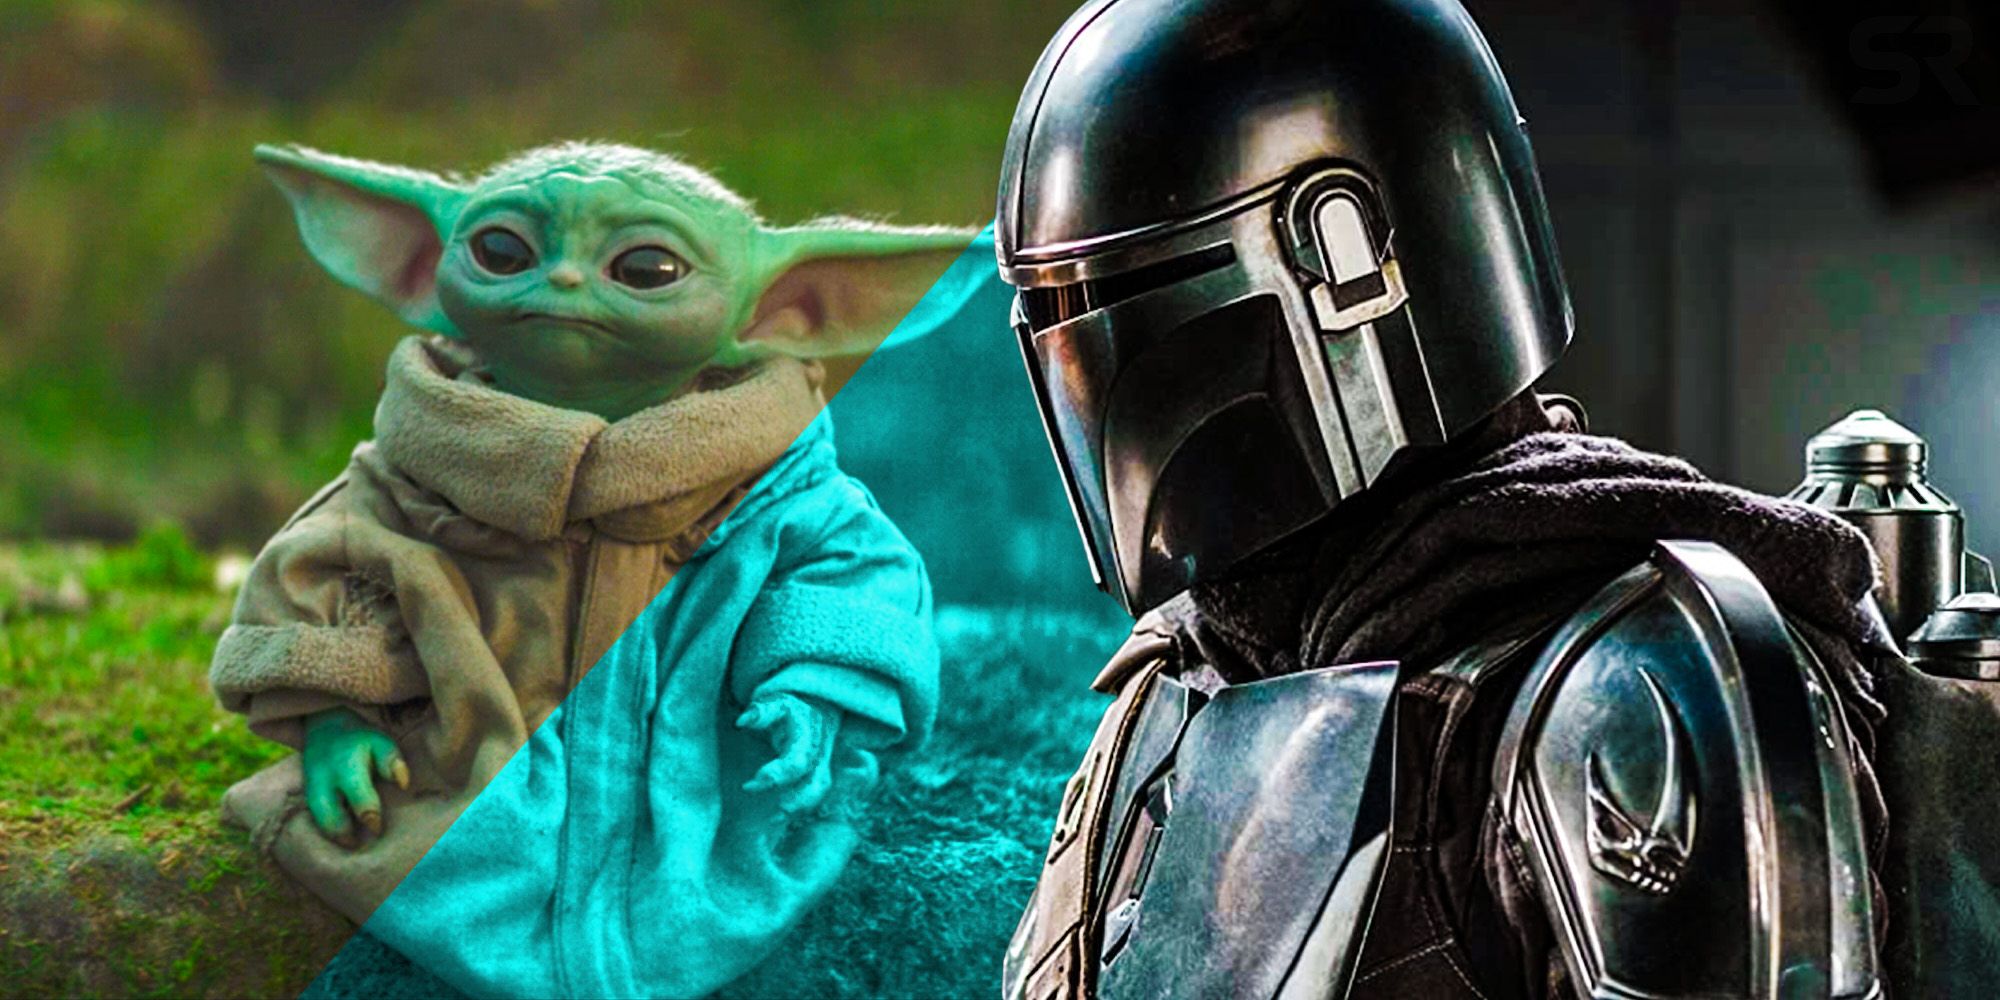 Is Grogu Related to Yoda? 'The Mandalorian' lore, Explained